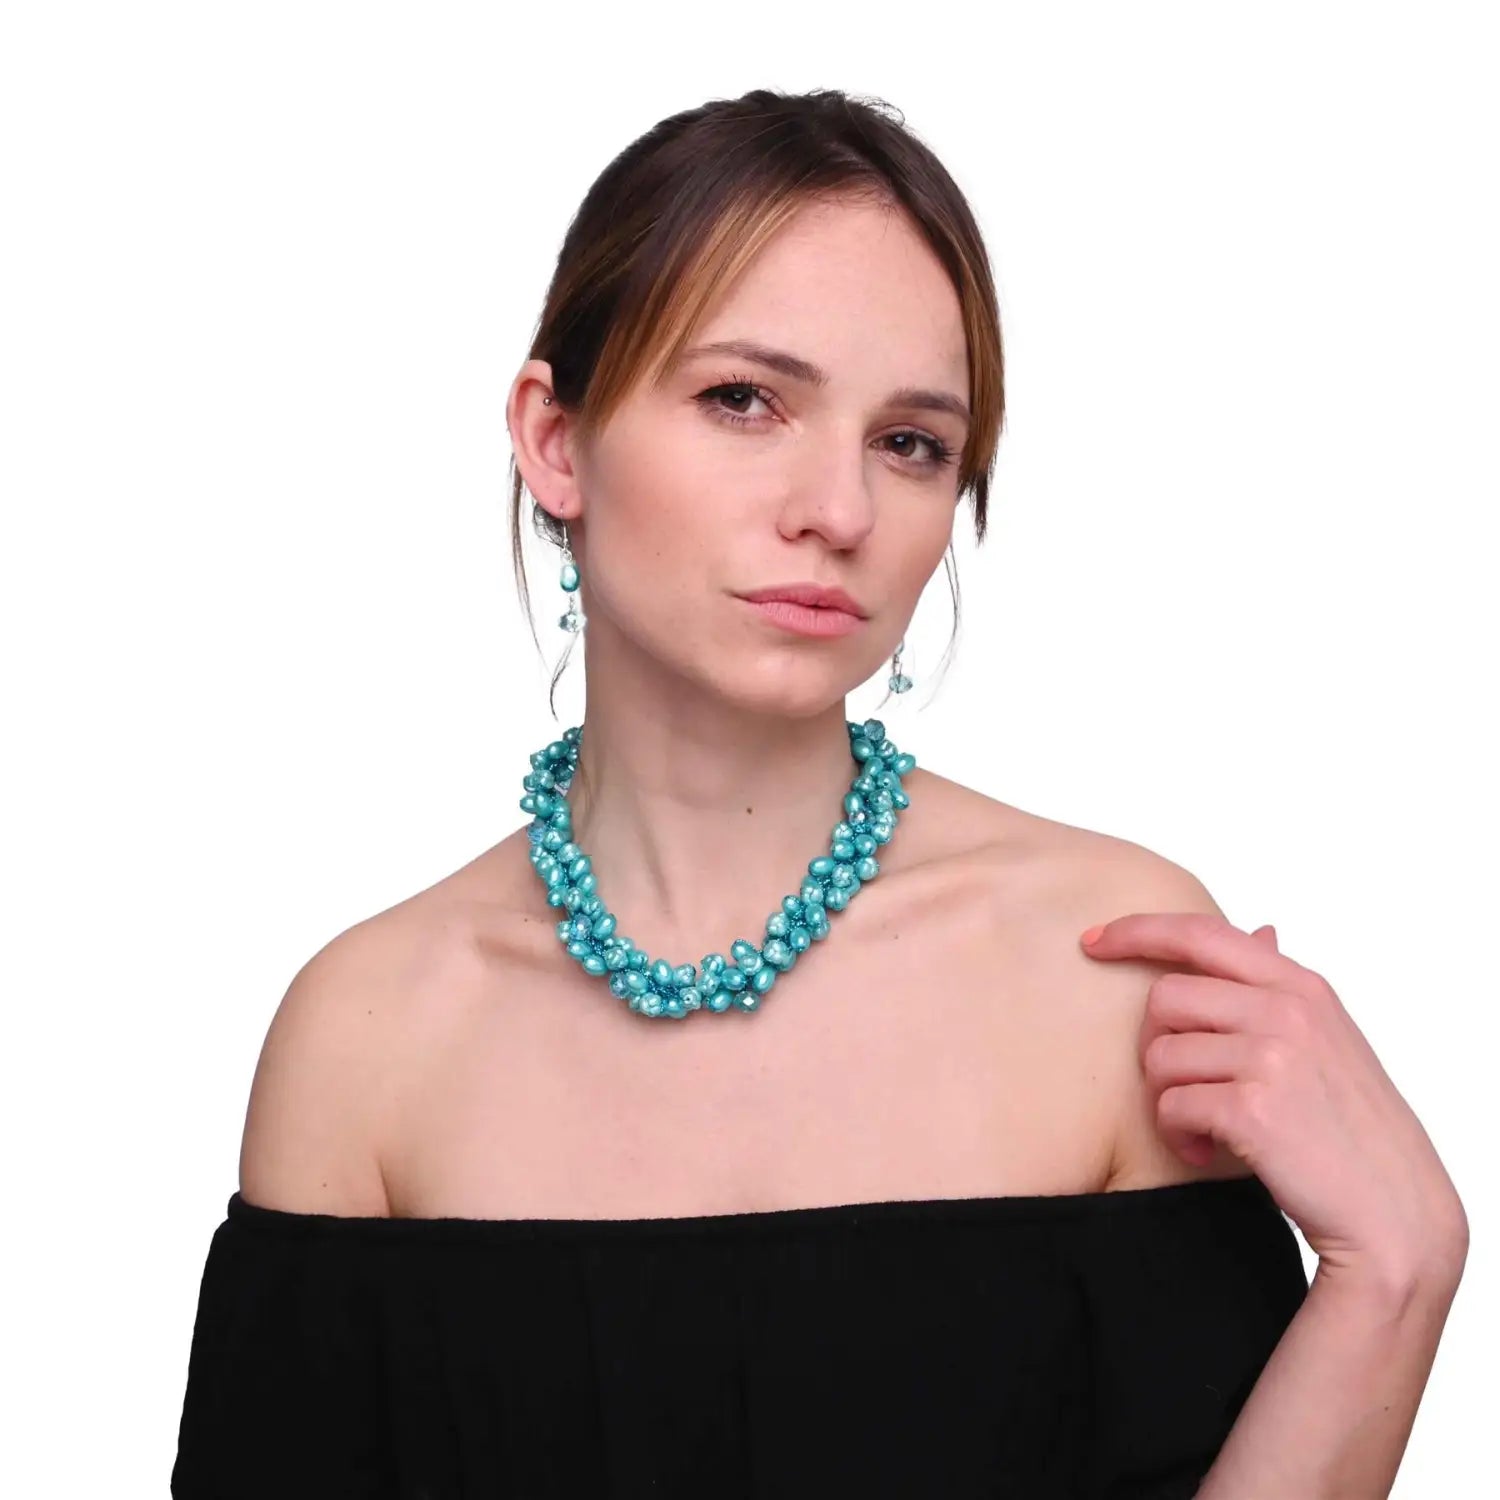 Woman wearing turquoise bead necklace from Pearl Bead Earring and Necklace Set Statement Jewellery.